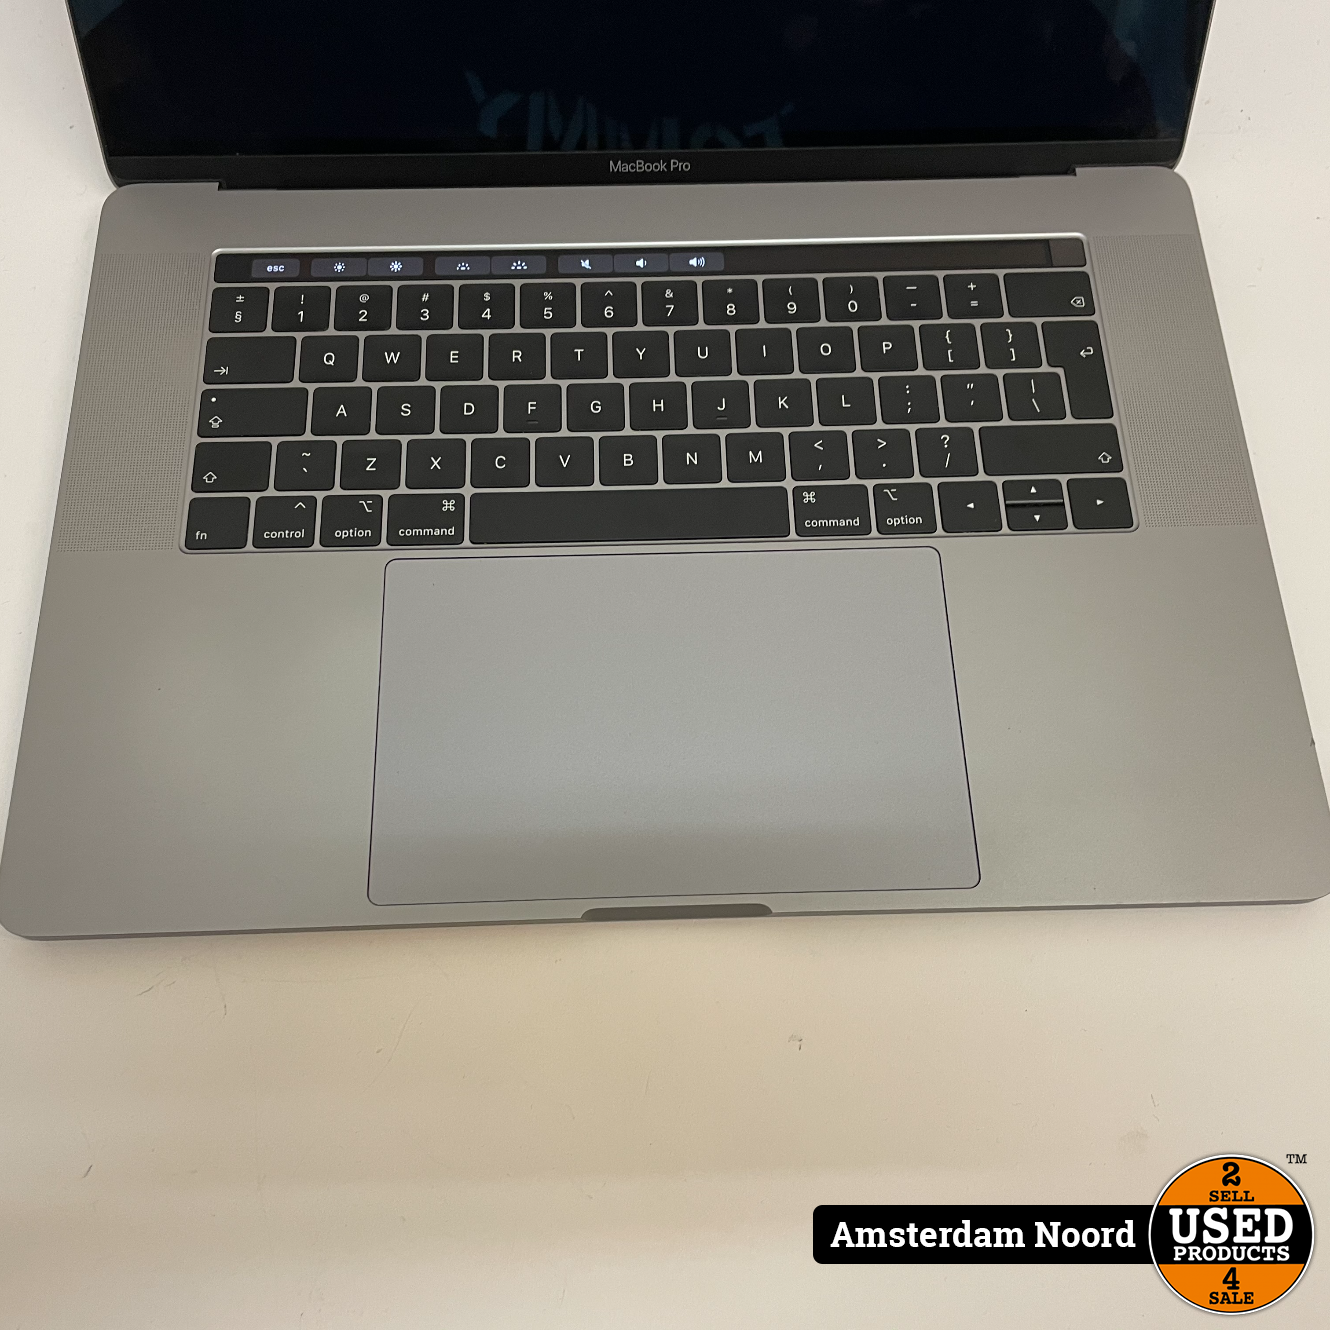 Apple MacBook Pro 2018 15-inch/i7-2.2Ghz/16GB/256SSD/BigSur - Used Products Amsterdam Noord